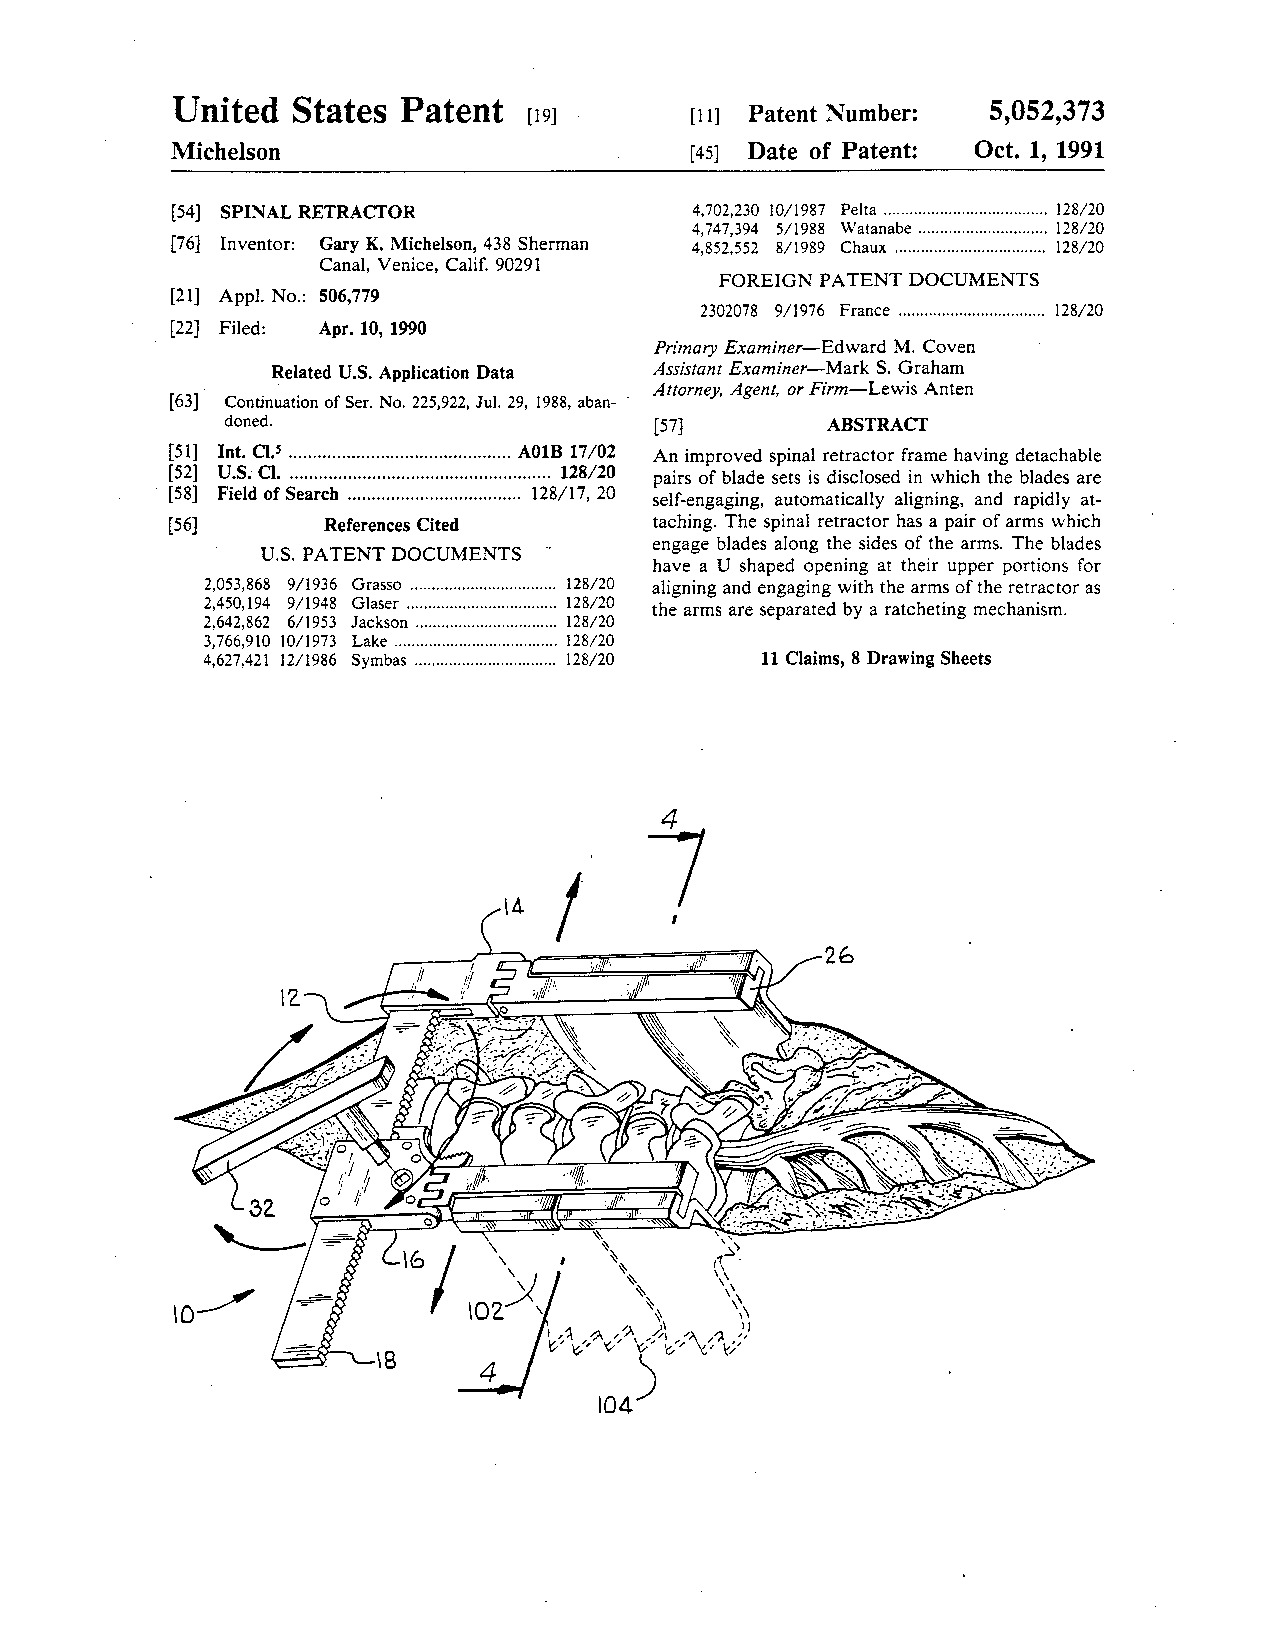 Spinal retractor - Patent 5,052,373